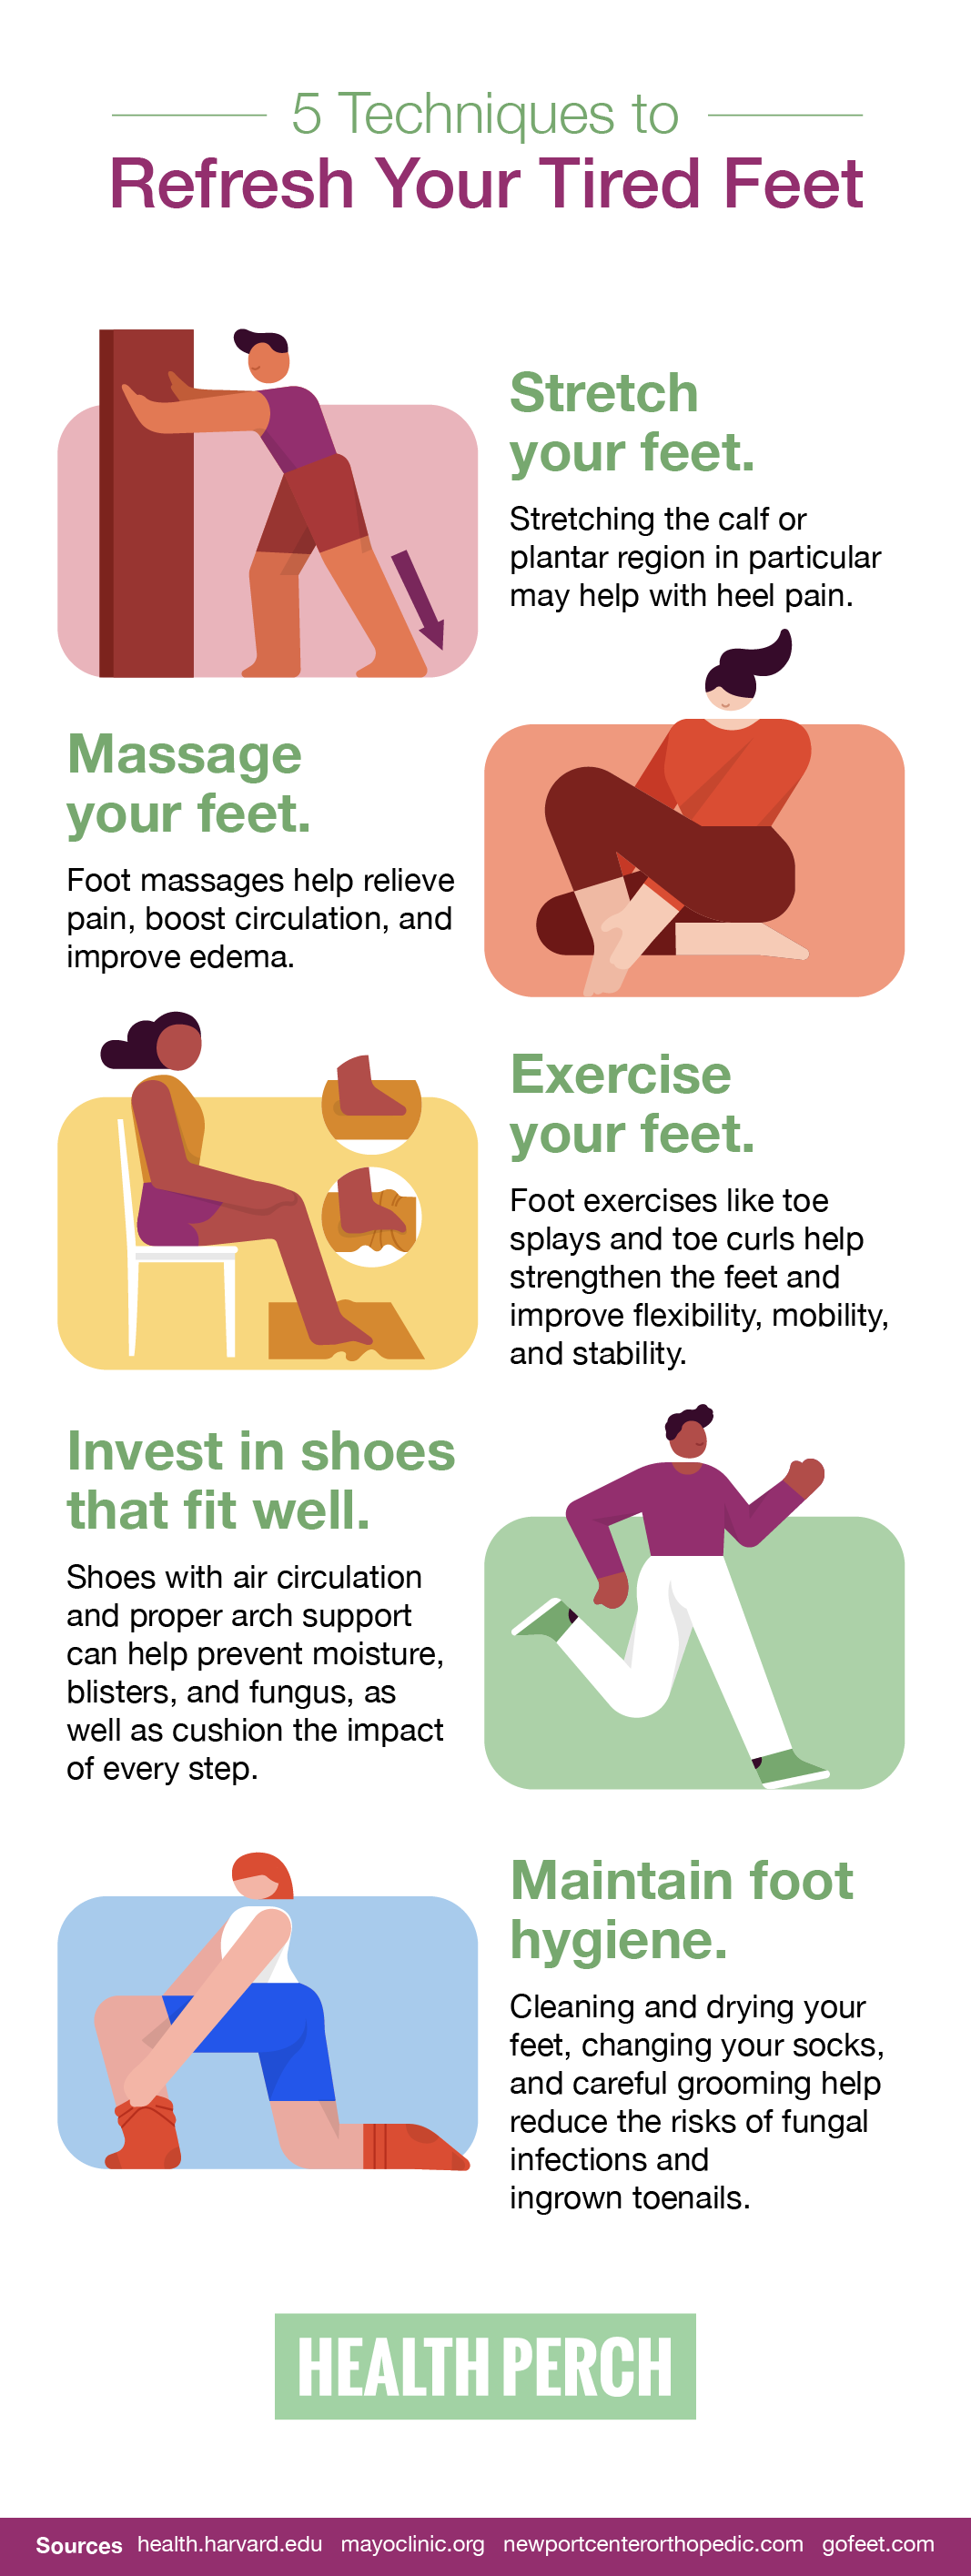 Refresh Your Tired Feet With These 5 Techniques